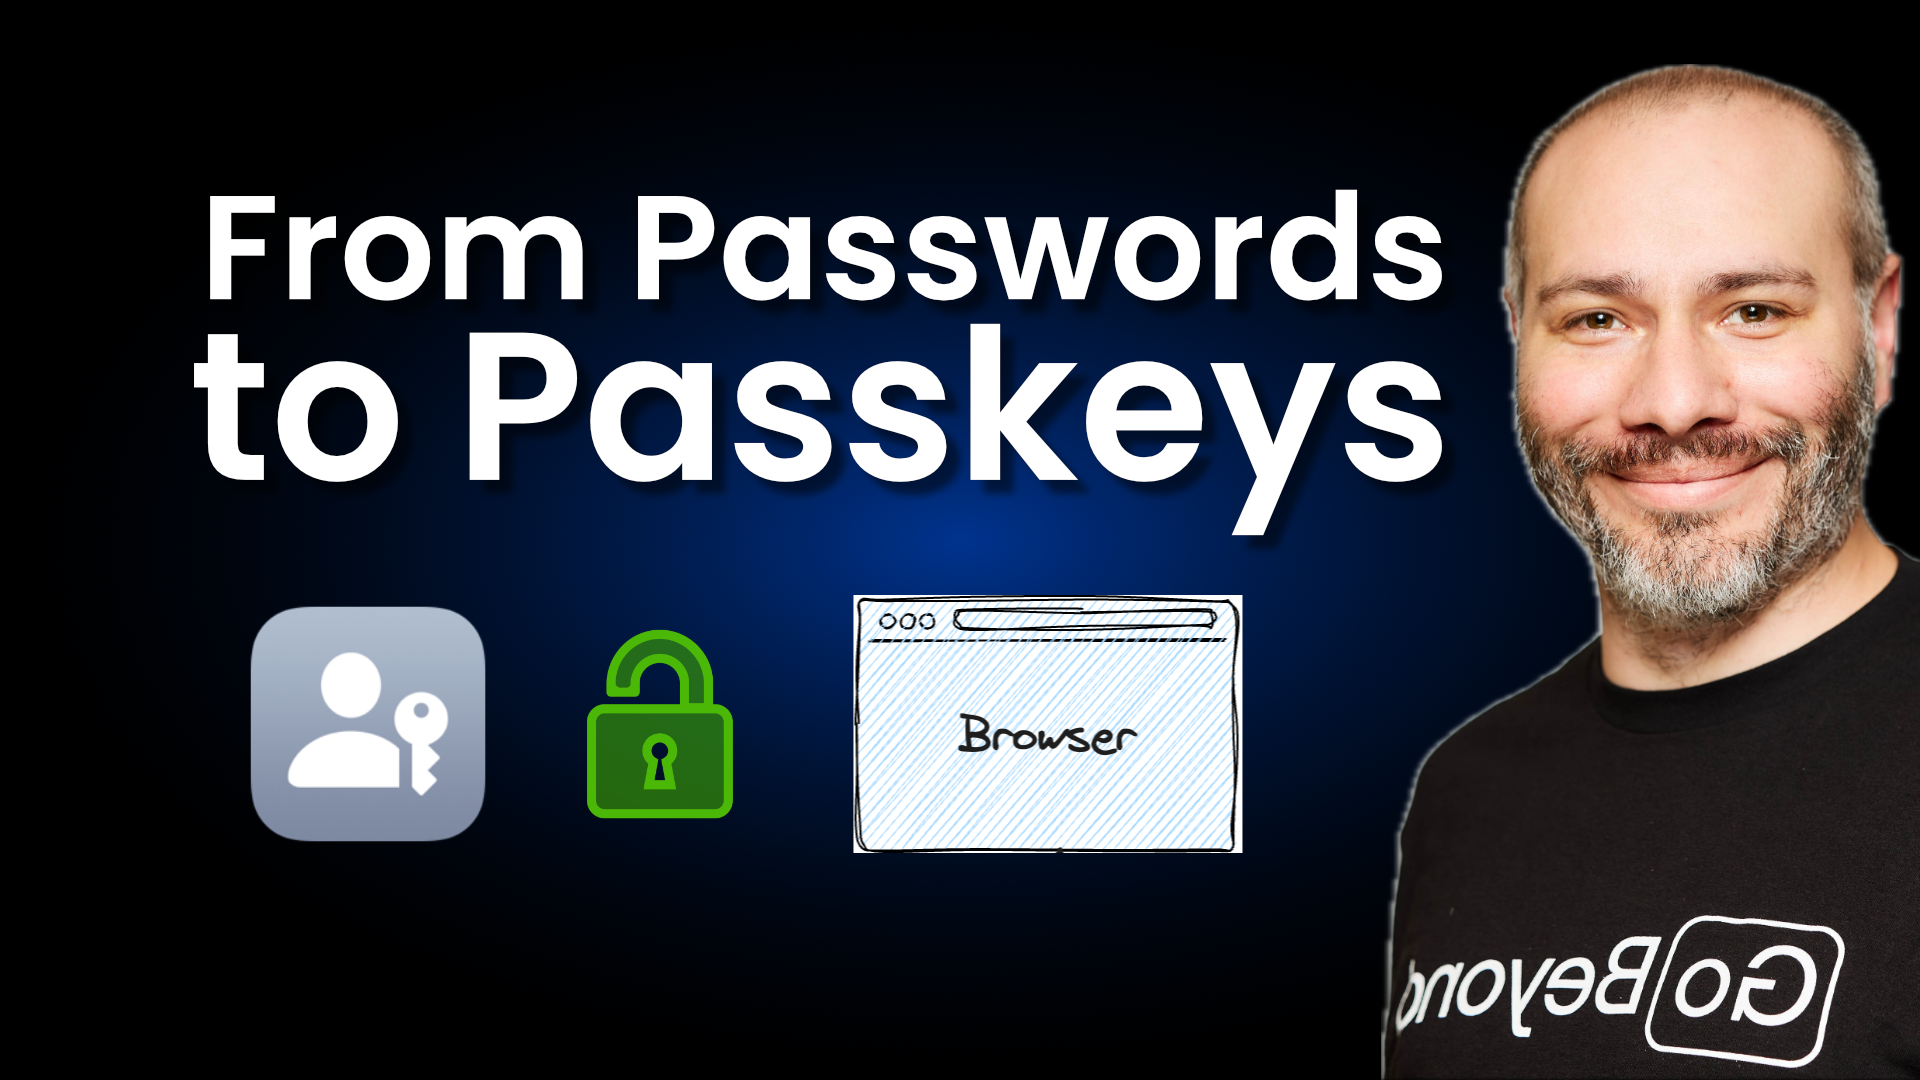 Image for More Secure Authentication: From Passwords to Passkeys